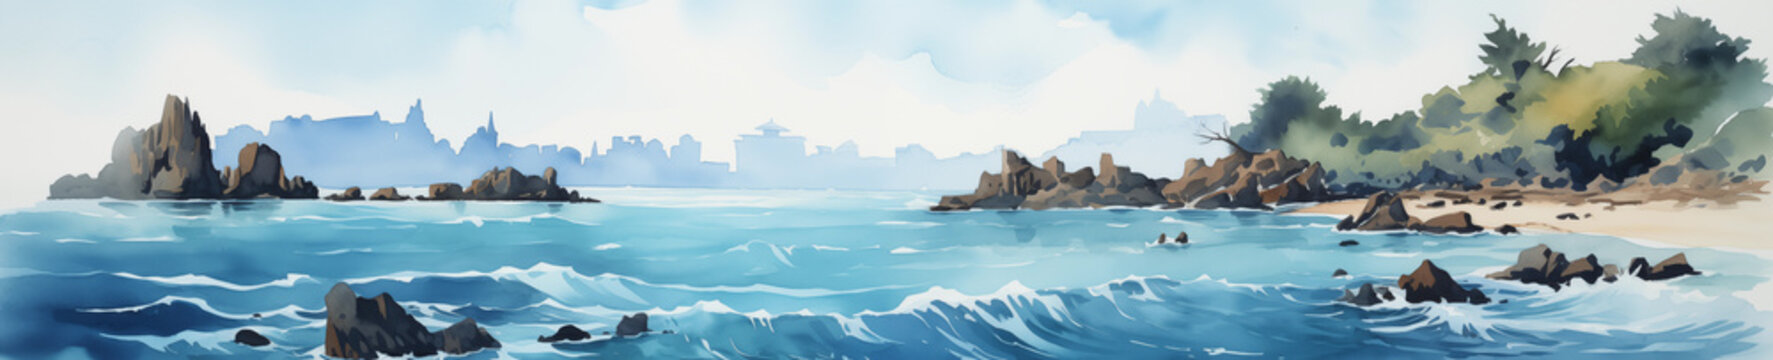 A panoramic watercolor illustration of a serene seascape with rocky outcrops and a distant city skyline.